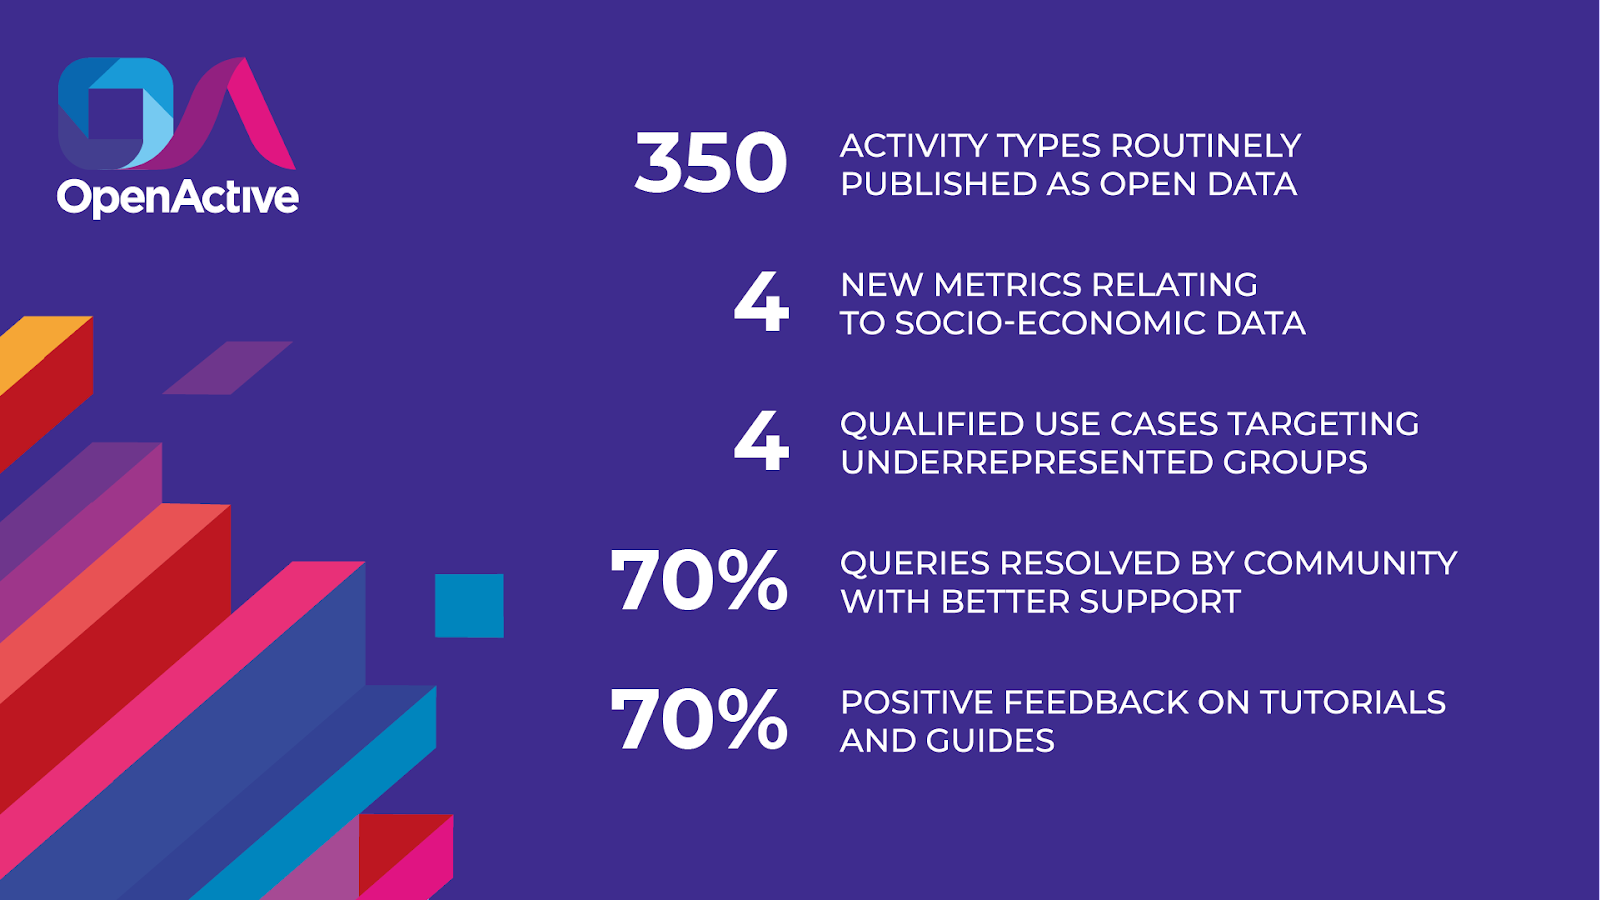 350 activity types rountinely published as open data; 4 new metrics relating to socio-economic data; 4 qualified use cases targeting underrepresented groups; 70% queries resolved by community with better support; 70% positive feedback on tutorials and gui